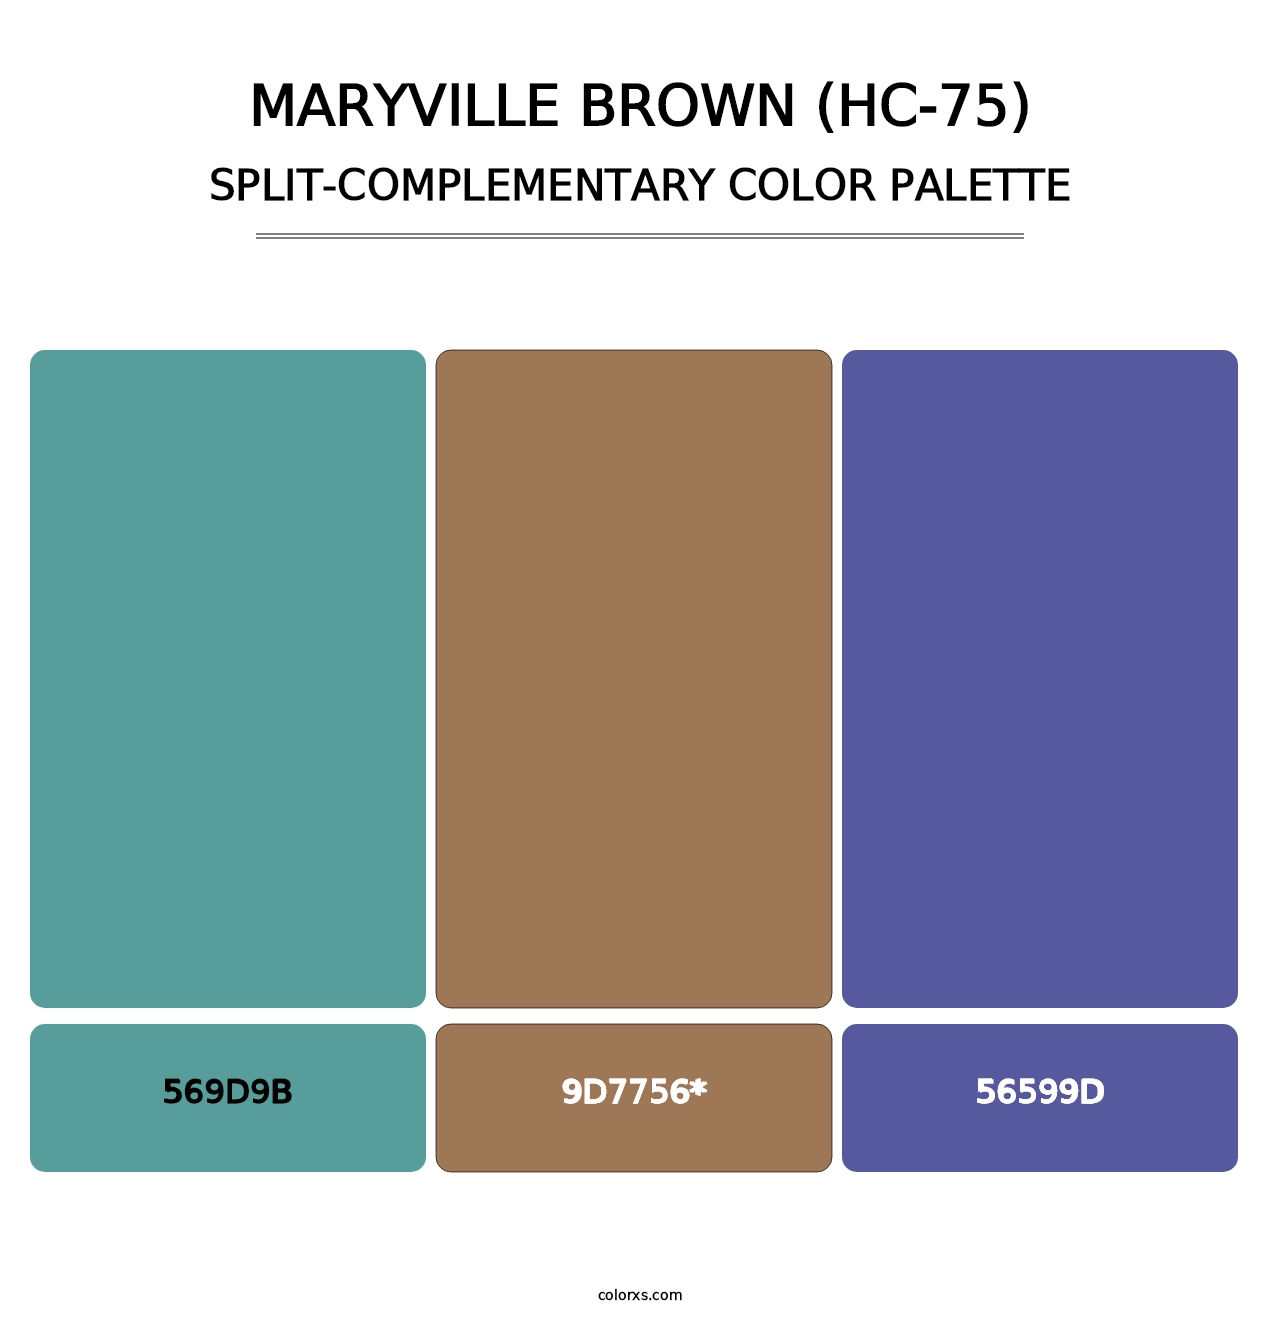 Maryville Brown (HC-75) - Split-Complementary Color Palette